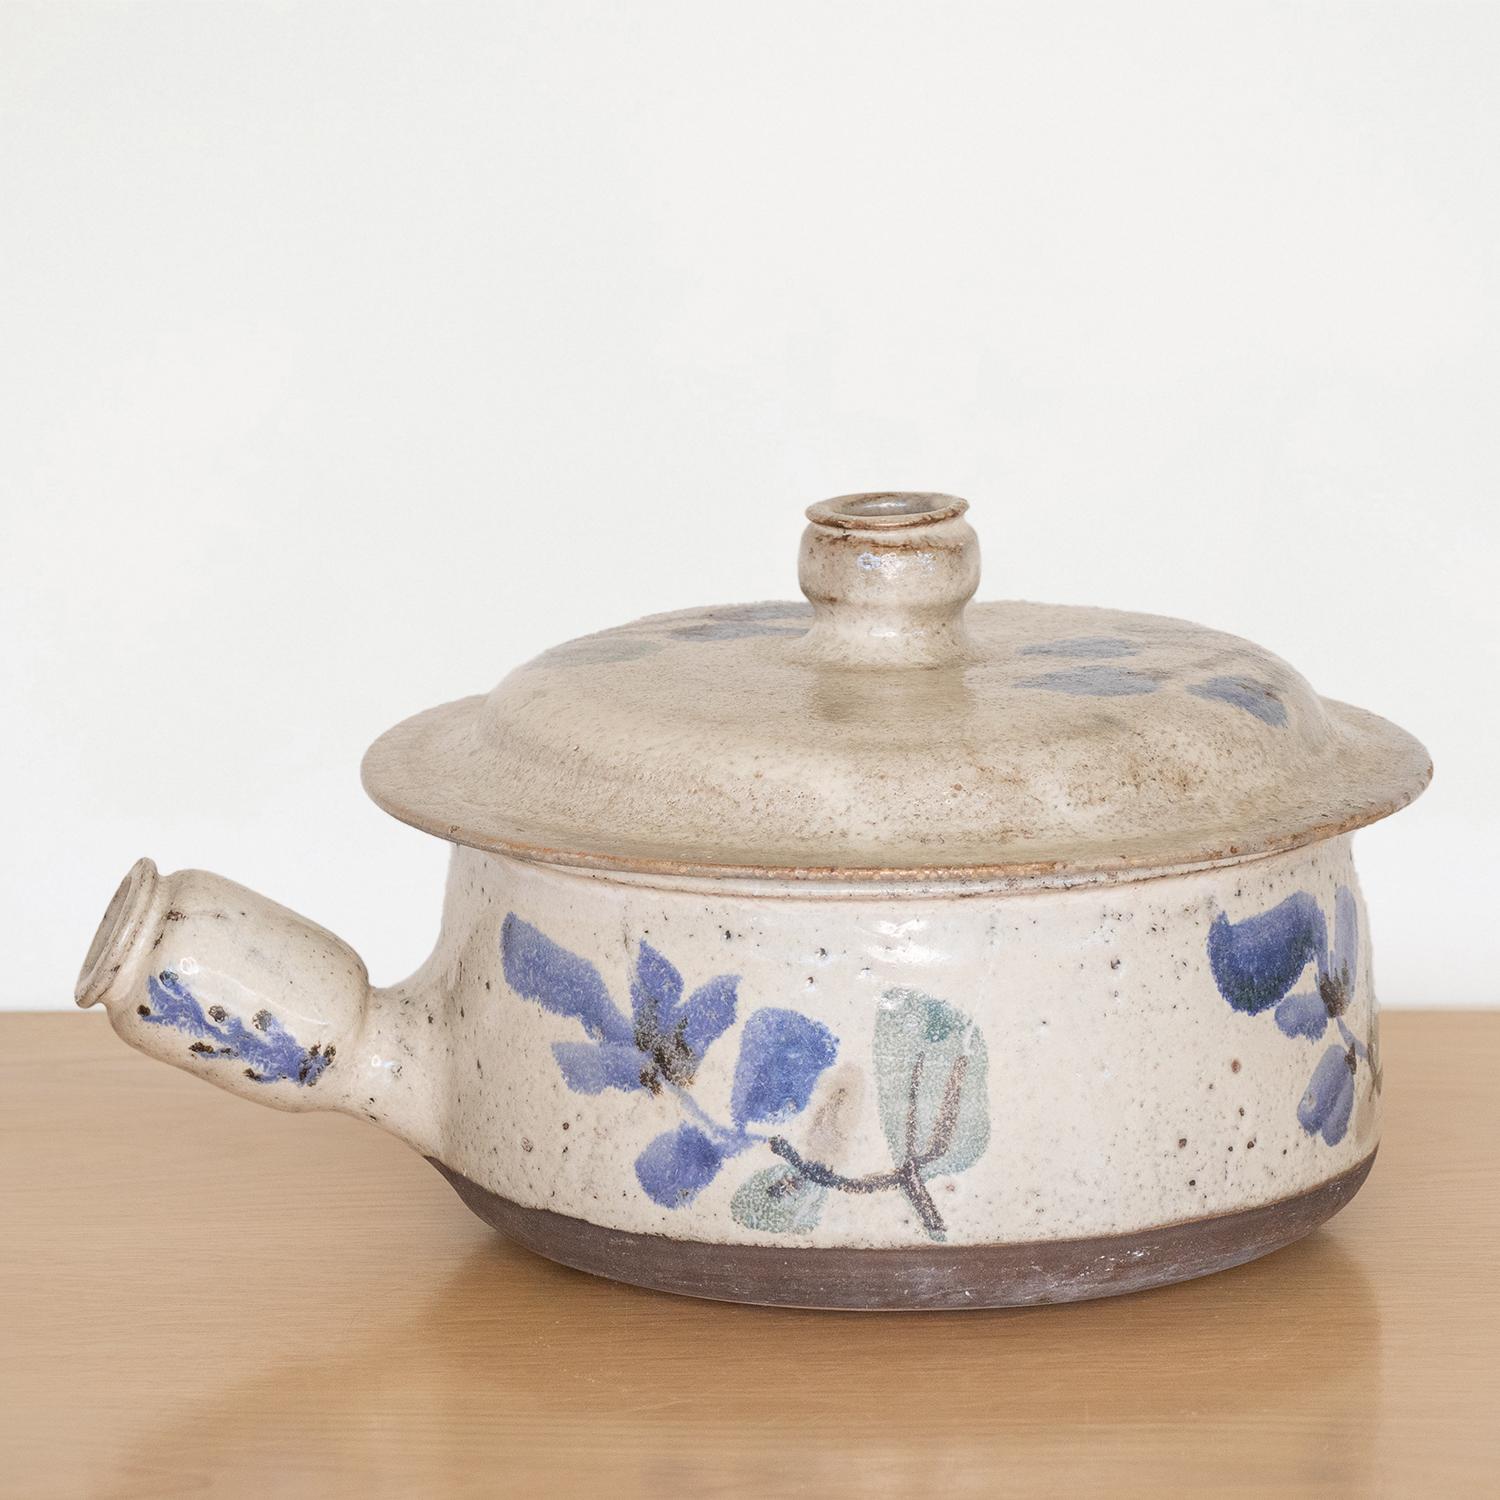 Beautiful hand painted pot with lid by Gustave Reynaud from France. White-grey glaze with blue and green painted floral motif. Handle and removable lid. Stunning display piece. Signed.